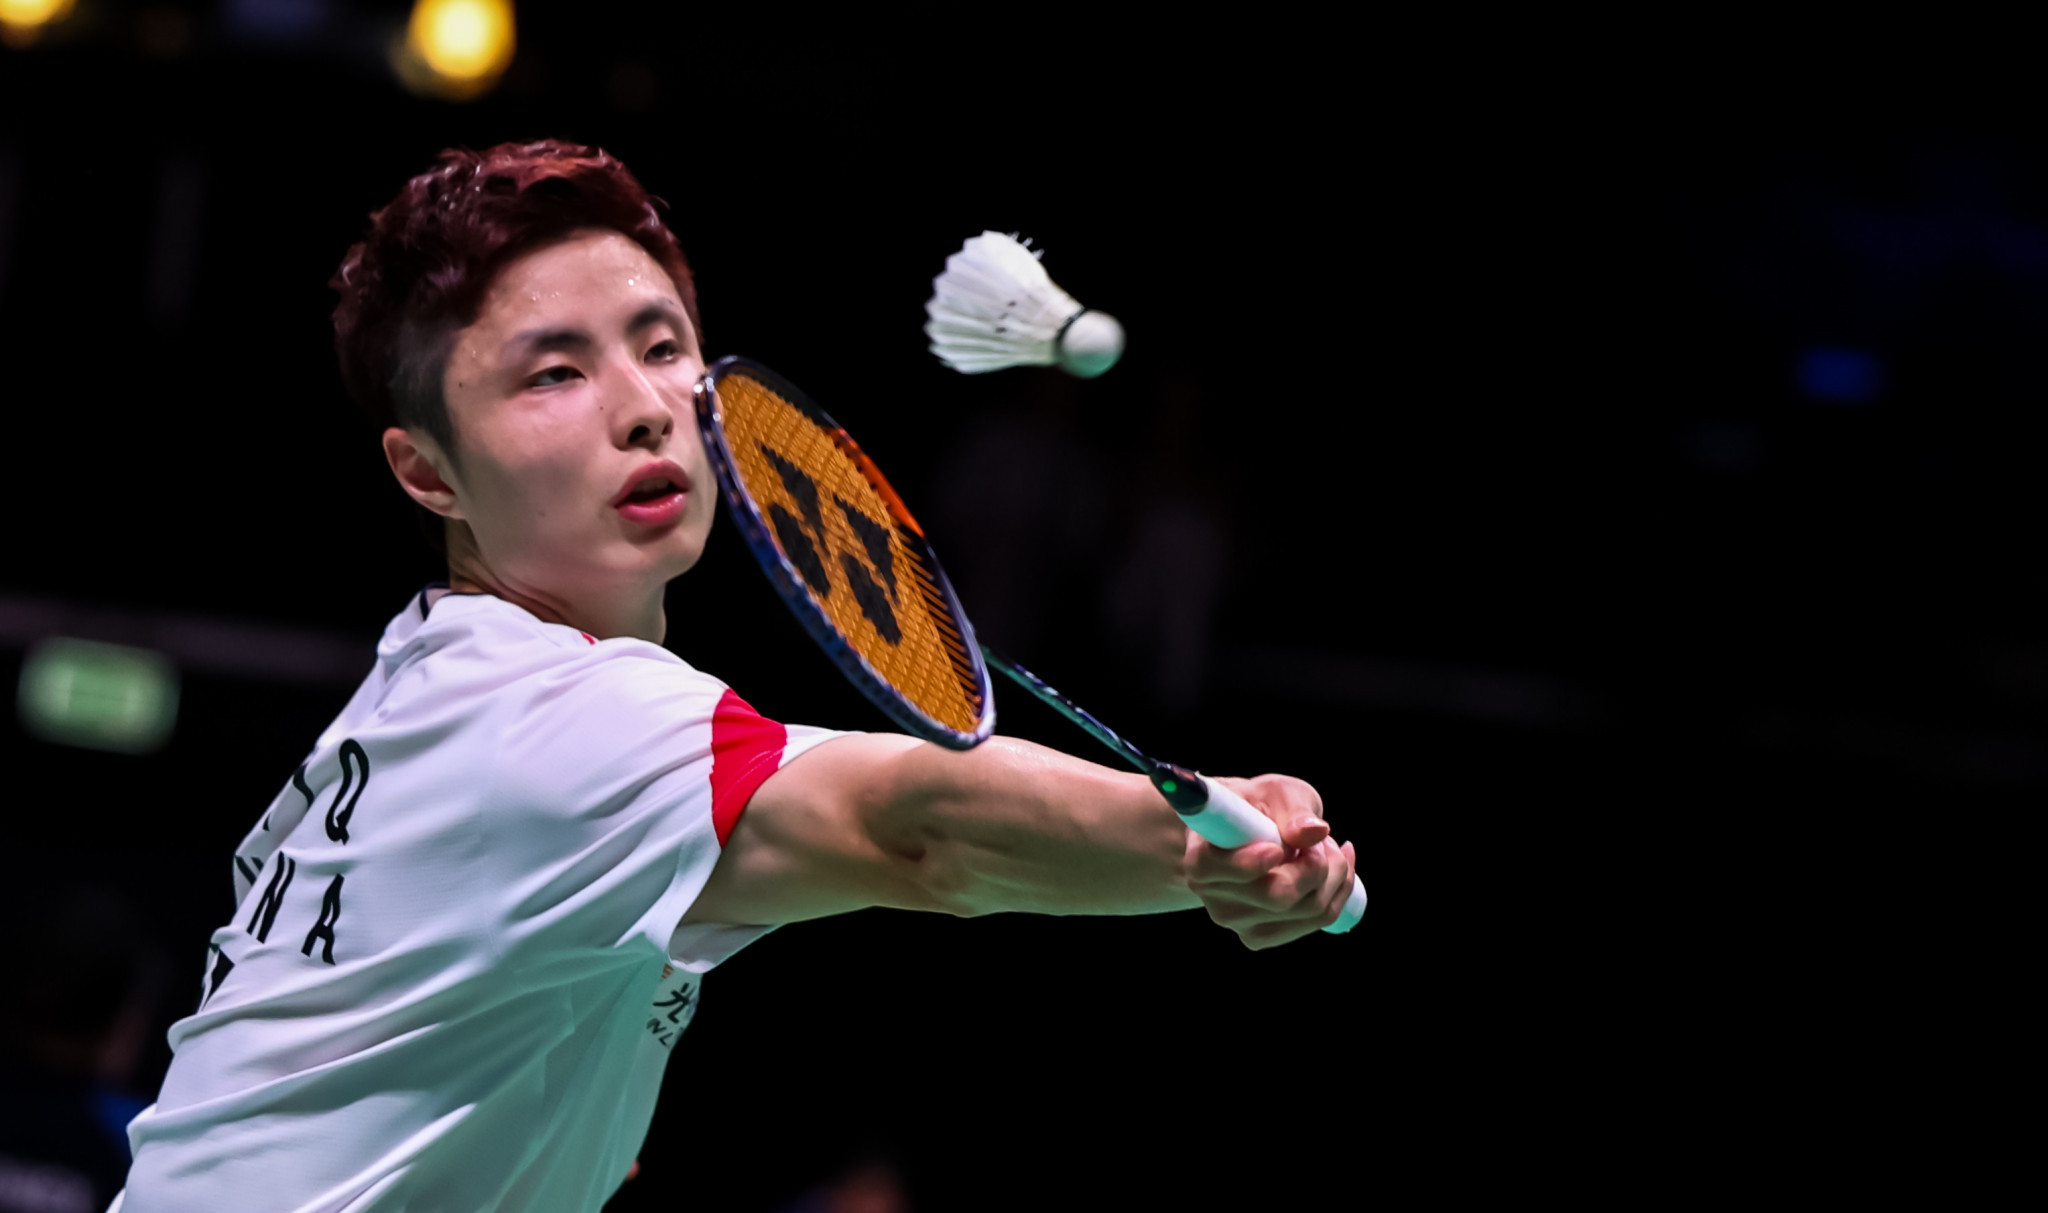 Shi Yuqi ensured another Chinese player progressed to the third round ©Badmintonphoto